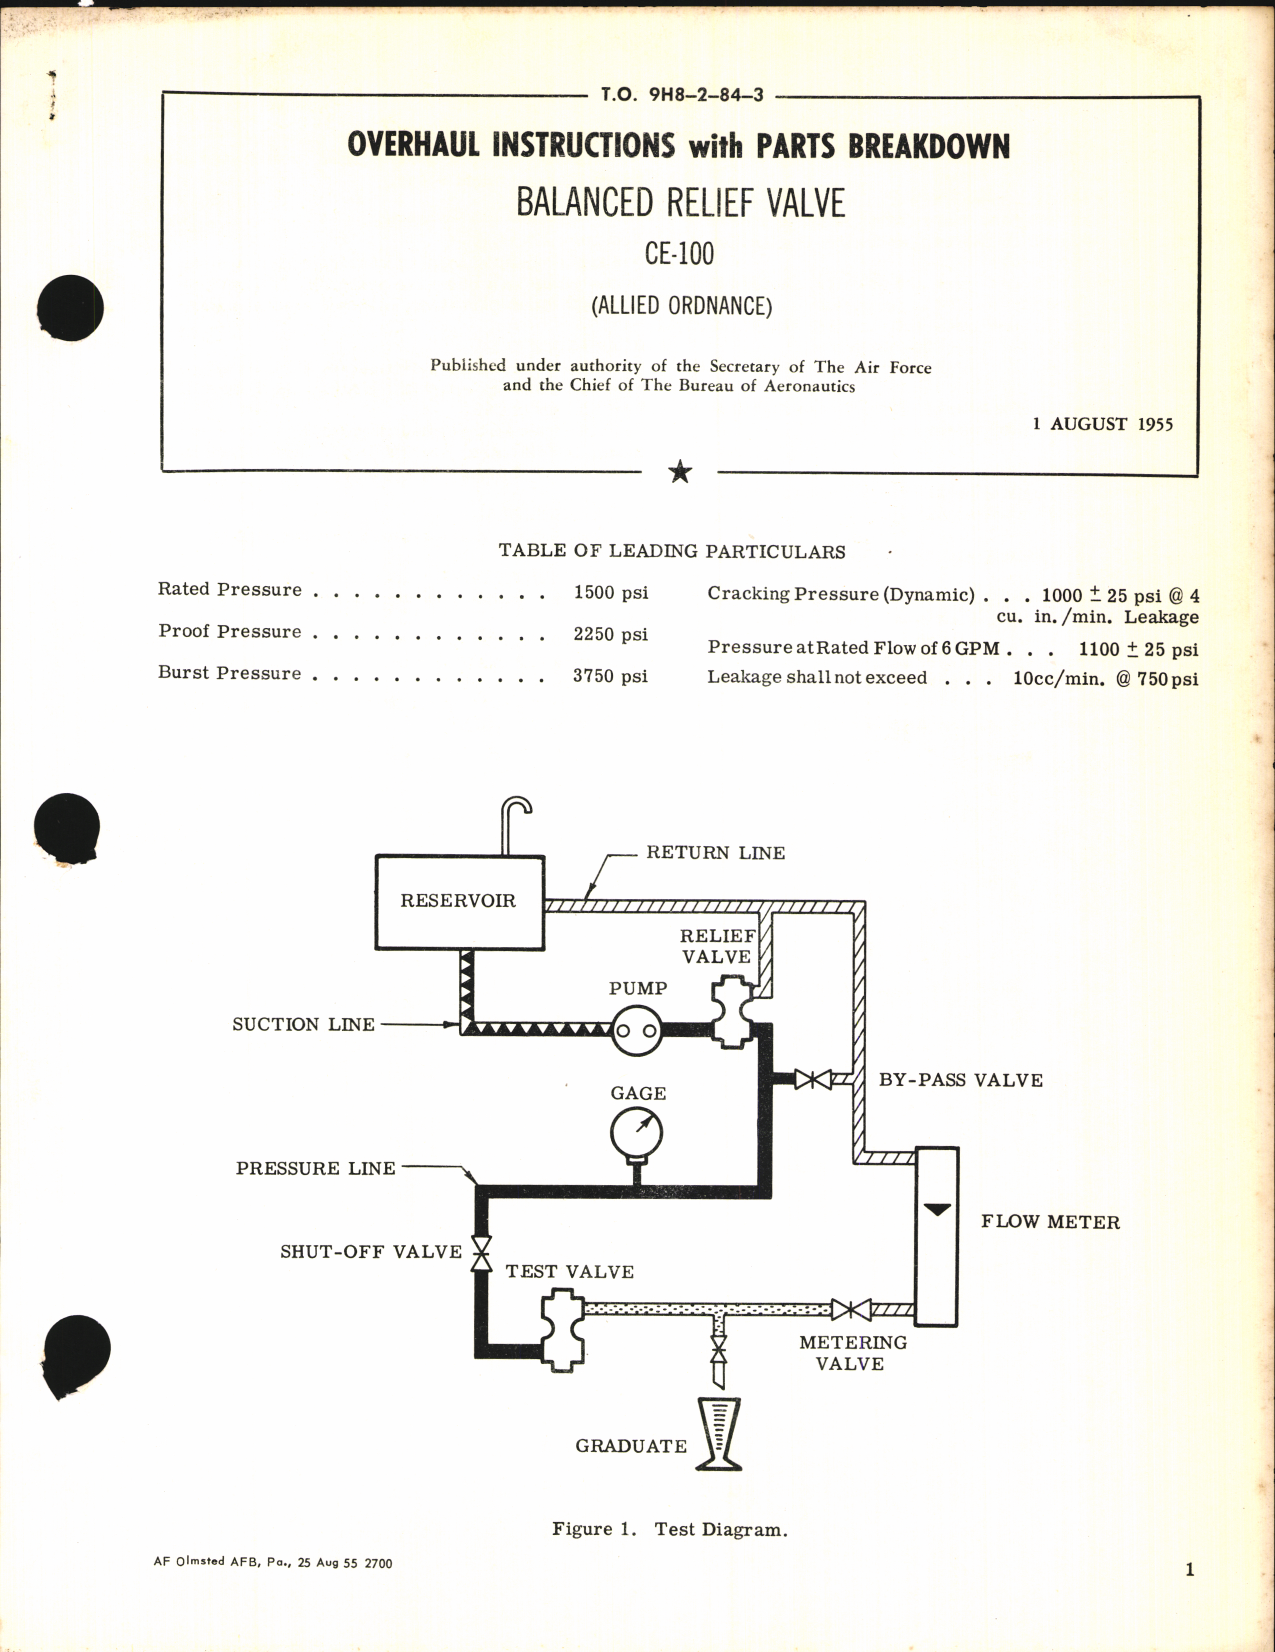 Sample page 1 from AirCorps Library document: Overhaul Instructions with Parts Breakdown for Balanced Relief Valve CE-100